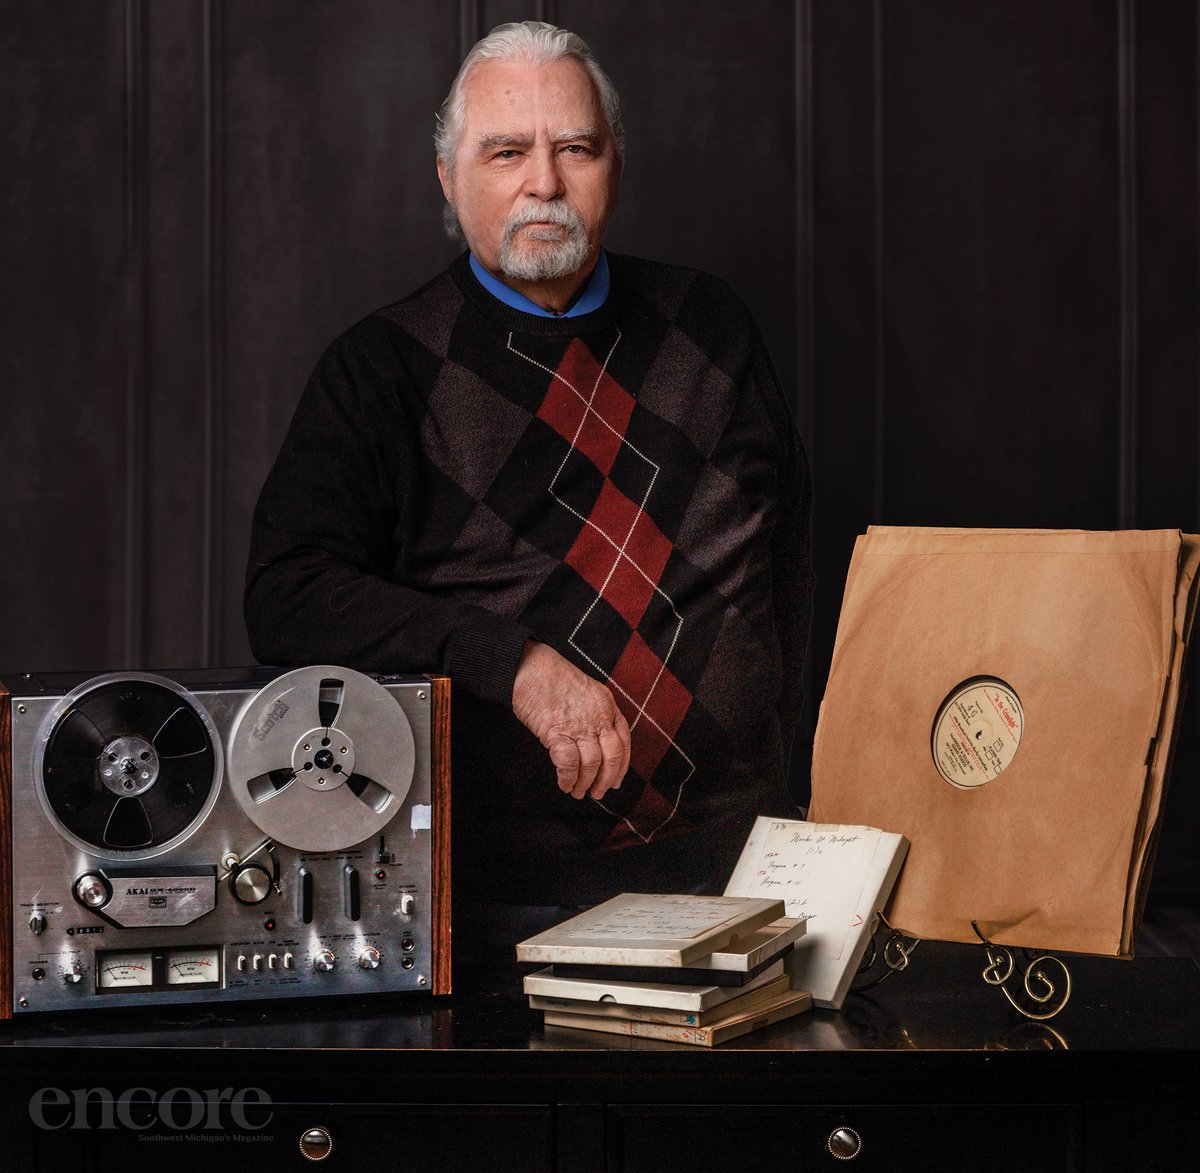 Looking for ‘Lost Radio’!
Don Ramlow hunts for and preserves Golden Age radio programs!
Read all about when Don first appeared in Encore - October 2005 with special online content and where he's at now!
encorekalamazoo.com/looking-for-lo…
#EncoreKalamazoo  #radioprogram #goldenage